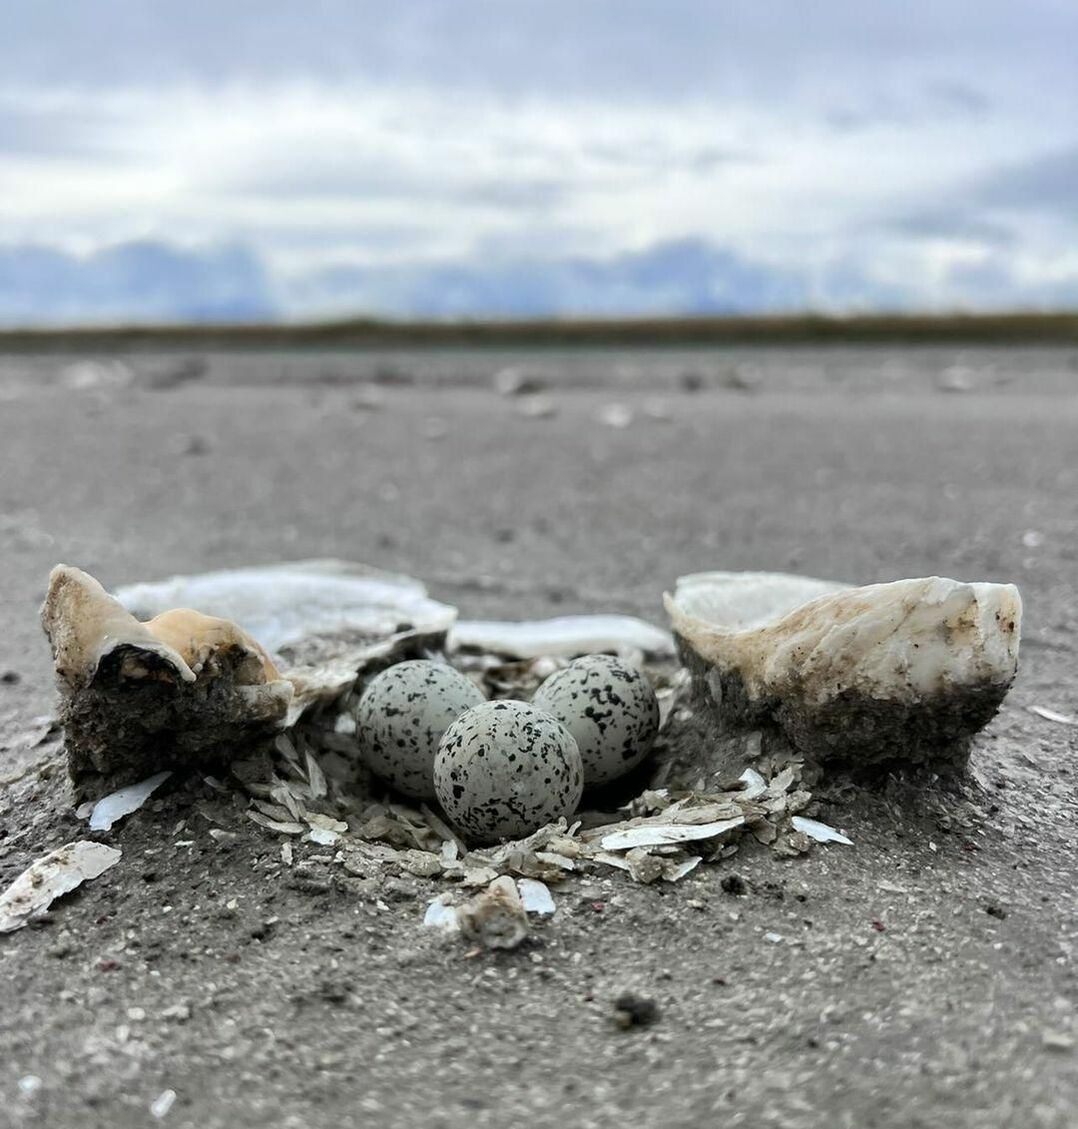 A Snowy Plover nest on the ground, which includes 3 spotted eggs with an oyster shell on each side.